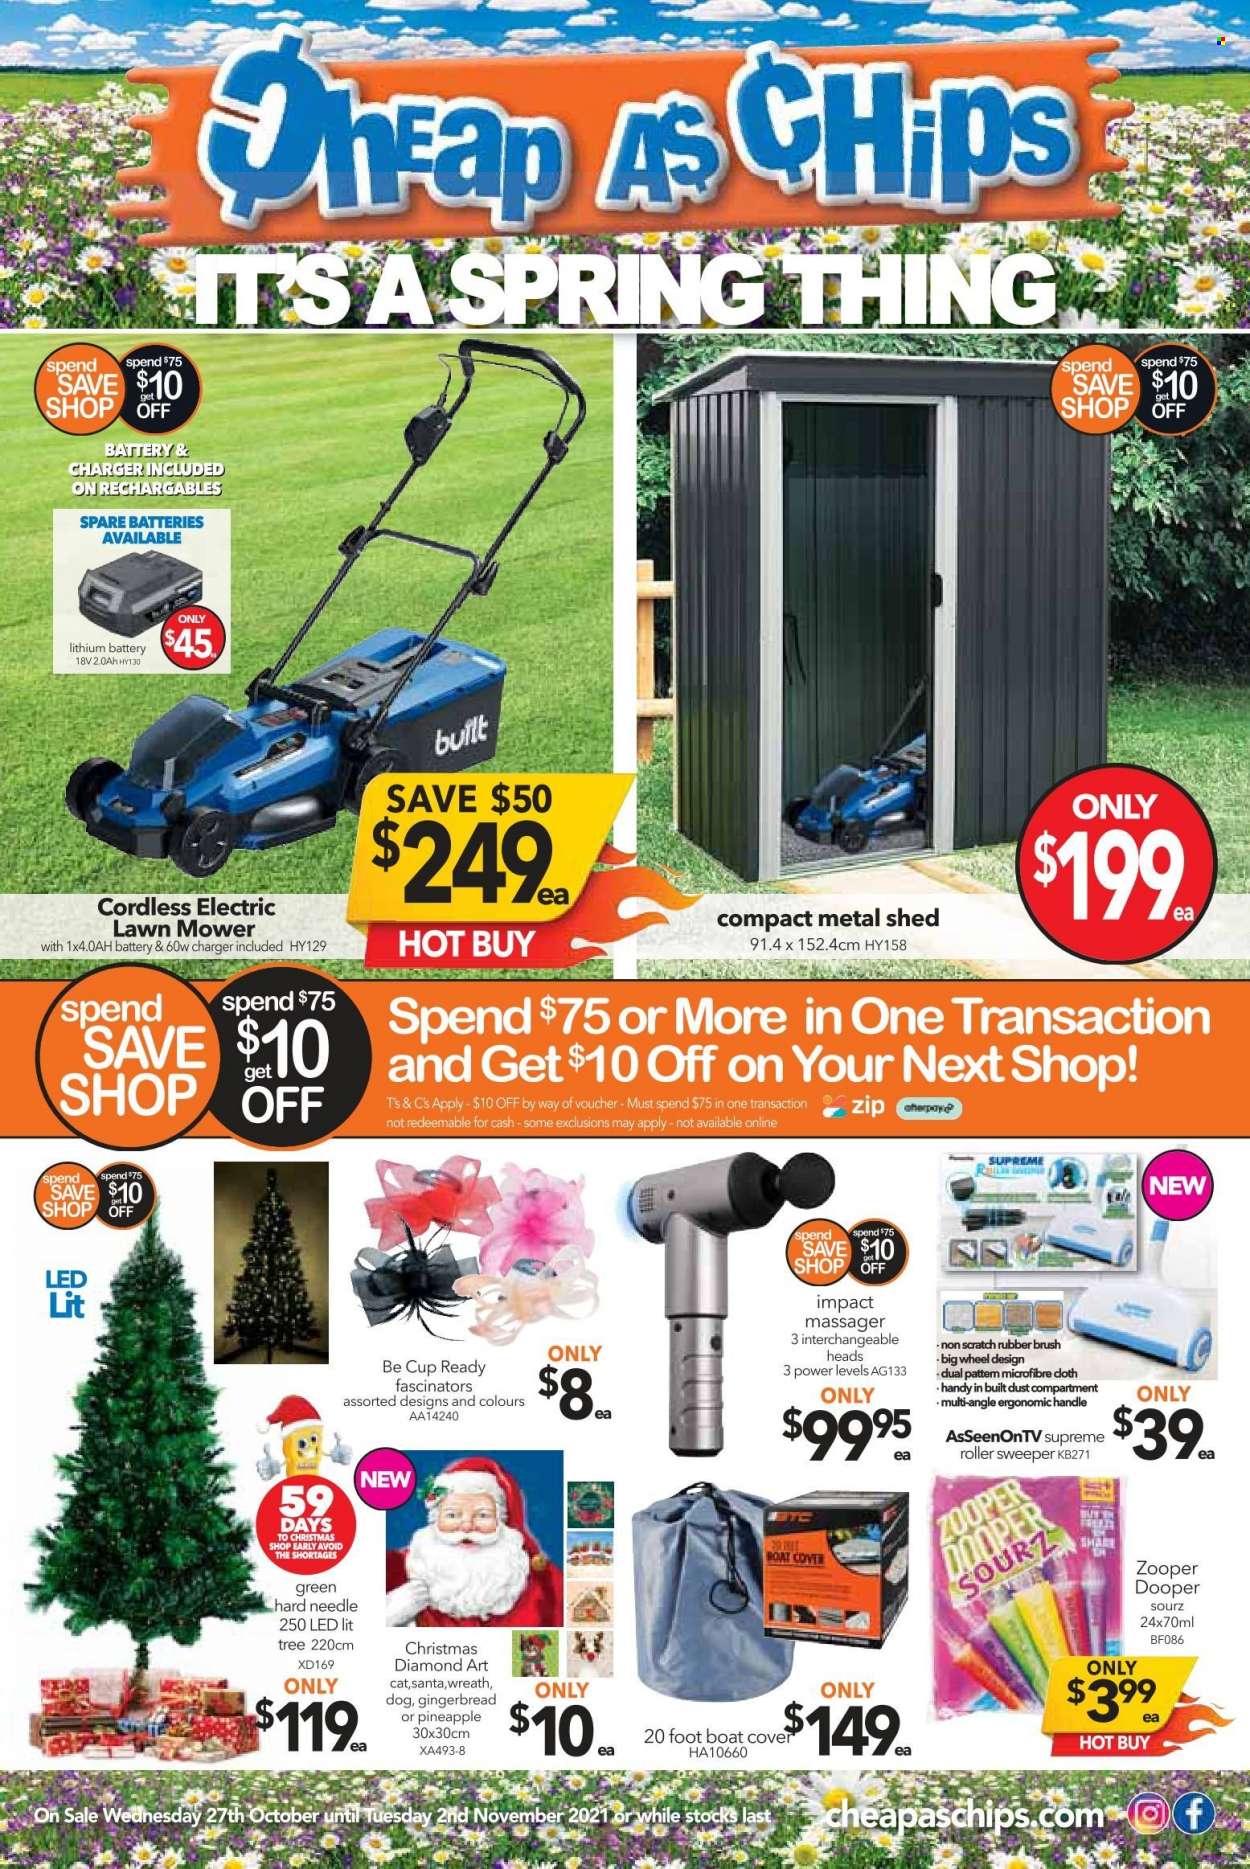 thumbnail - Cheap as Chips Catalogue - 27 Oct 2021 - 2 Nov 2021 - Sales products - wreath, gingerbread, Zooper Dooper, Santa, cup, eraser, massager, roller, boat cover, lawn mower, shed. Page 1.